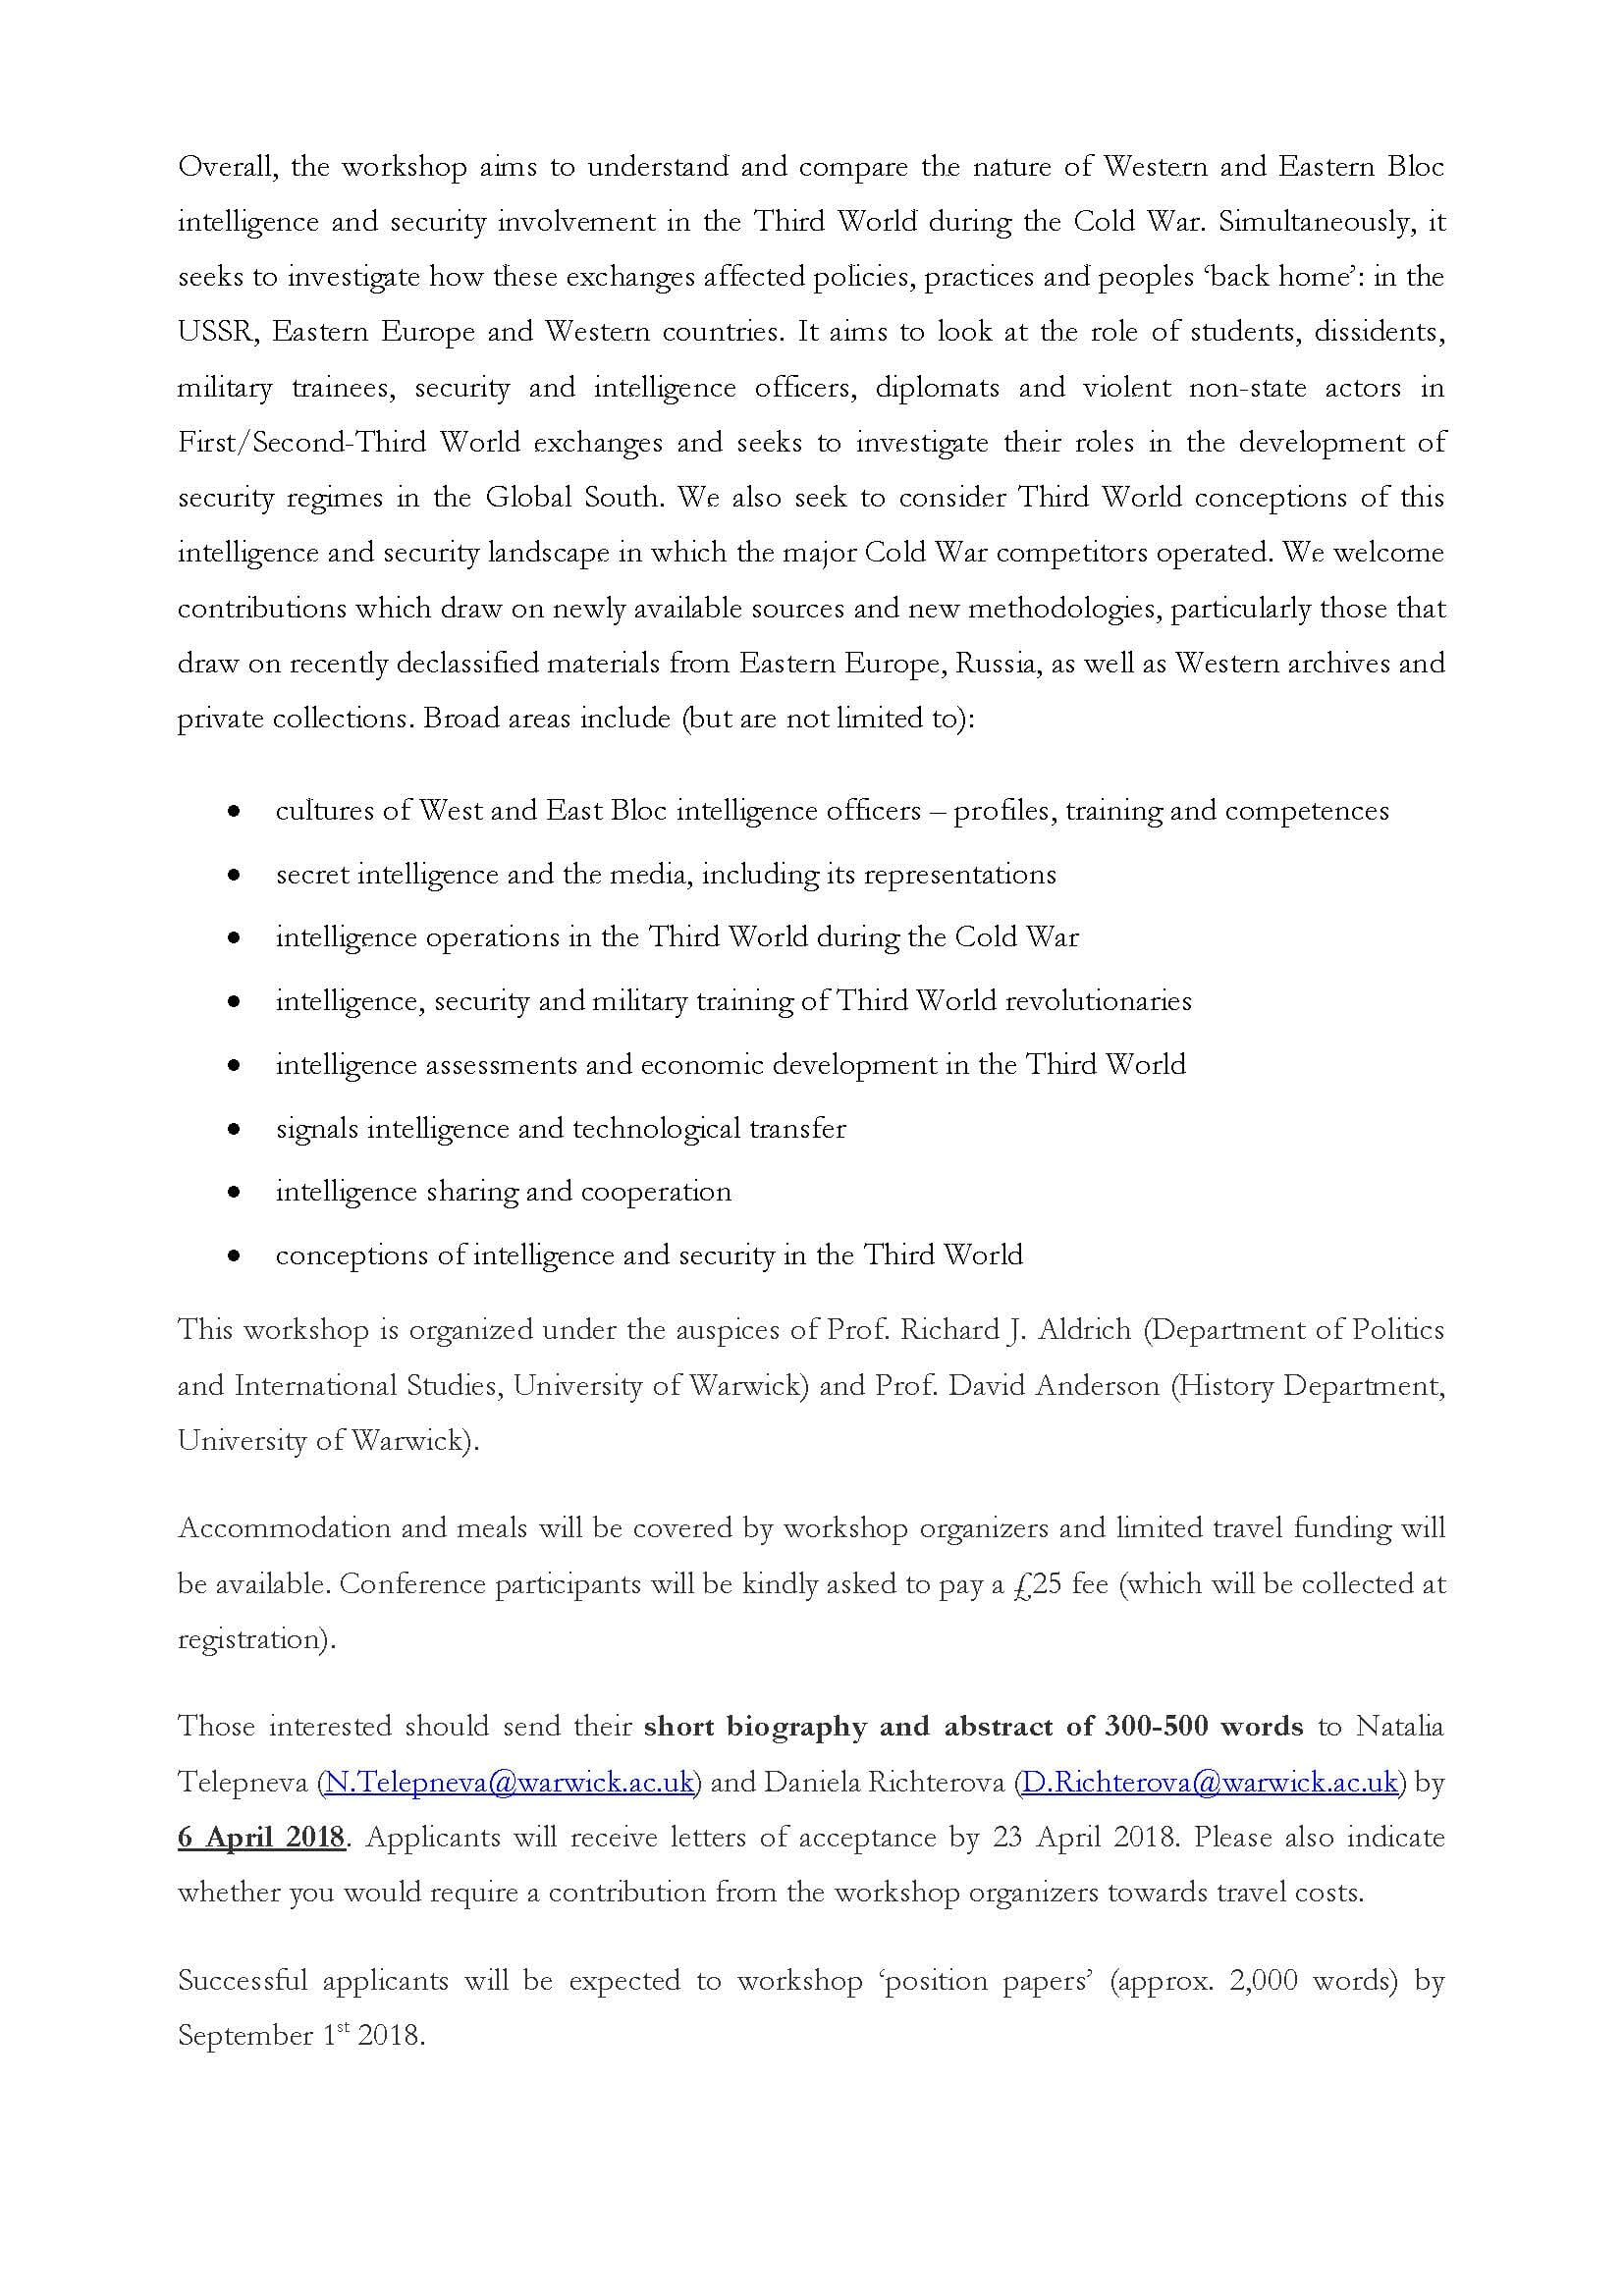 CALL FOR PAPERS The Secret Struggle for the Global South Workshop Page 2